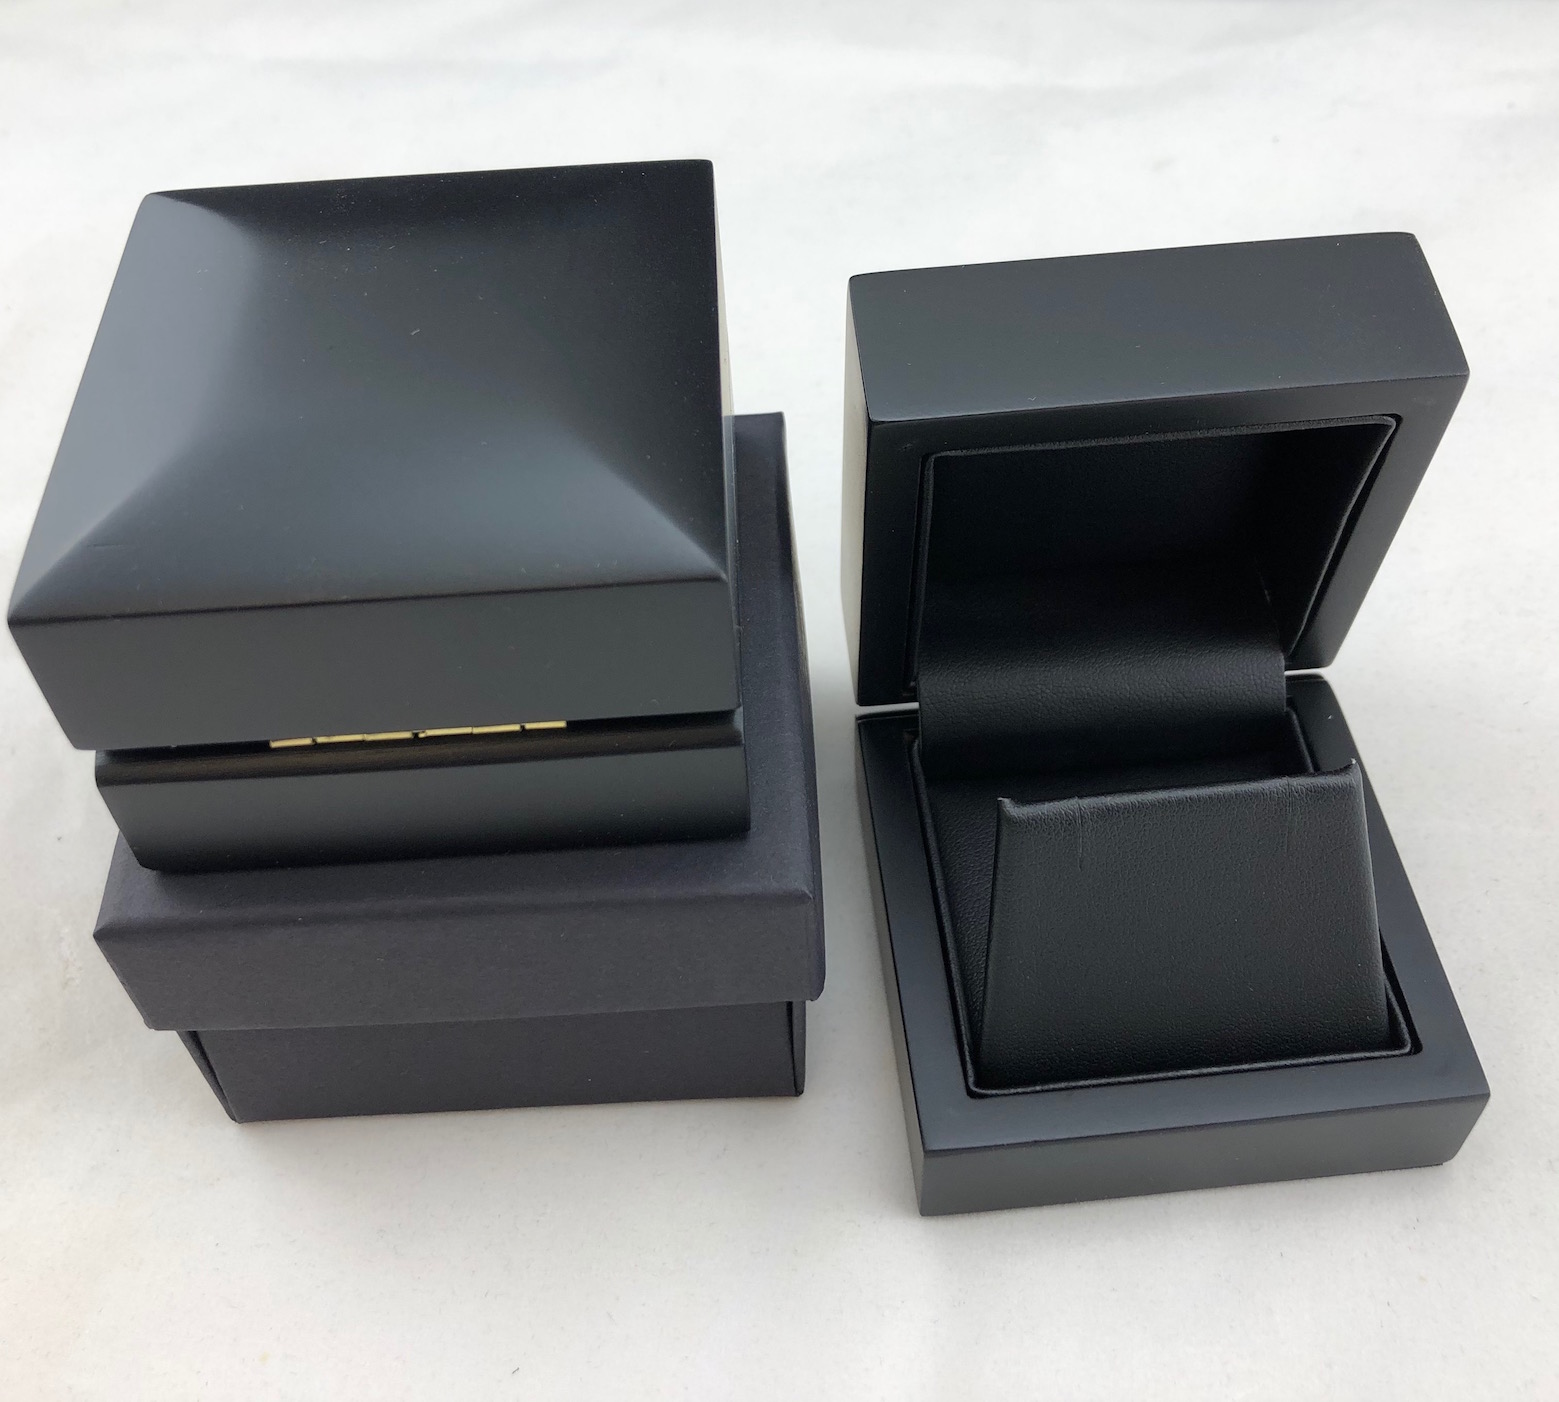 Midnight Elegance Earring Box with rear view showing the brass hinge